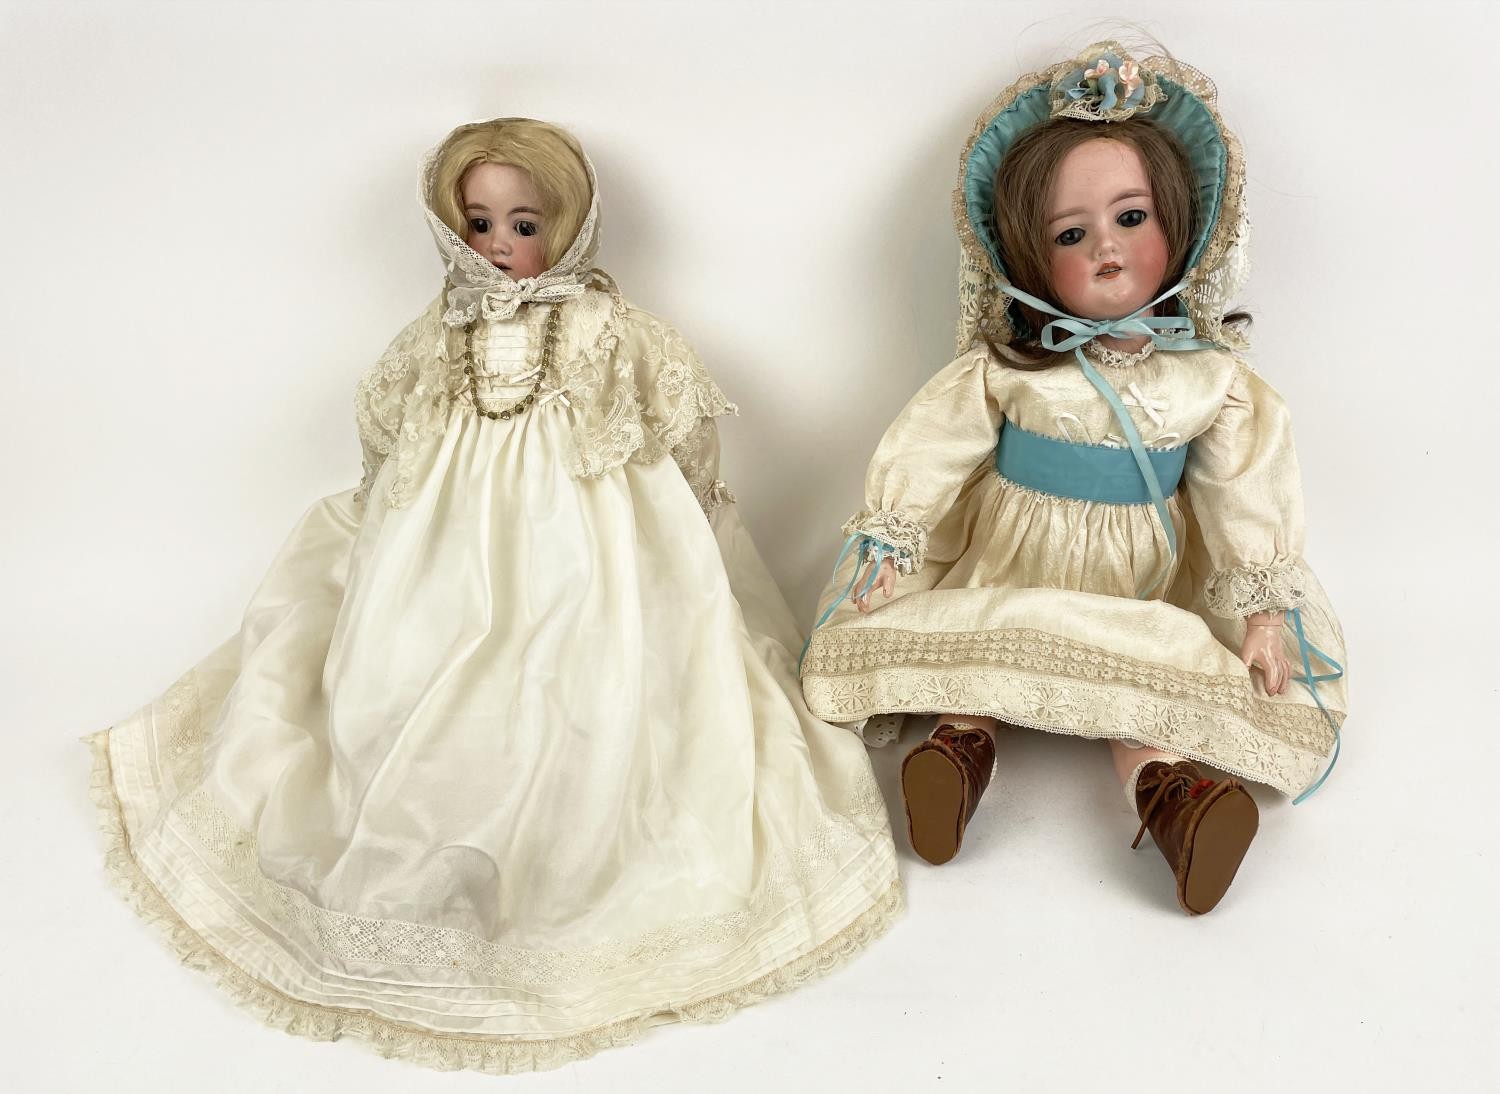 BISQUE HEAD DOLLS, two, c.1900-1910, German by Armand Marseille Kopplesdorf. (2) - Image 10 of 10